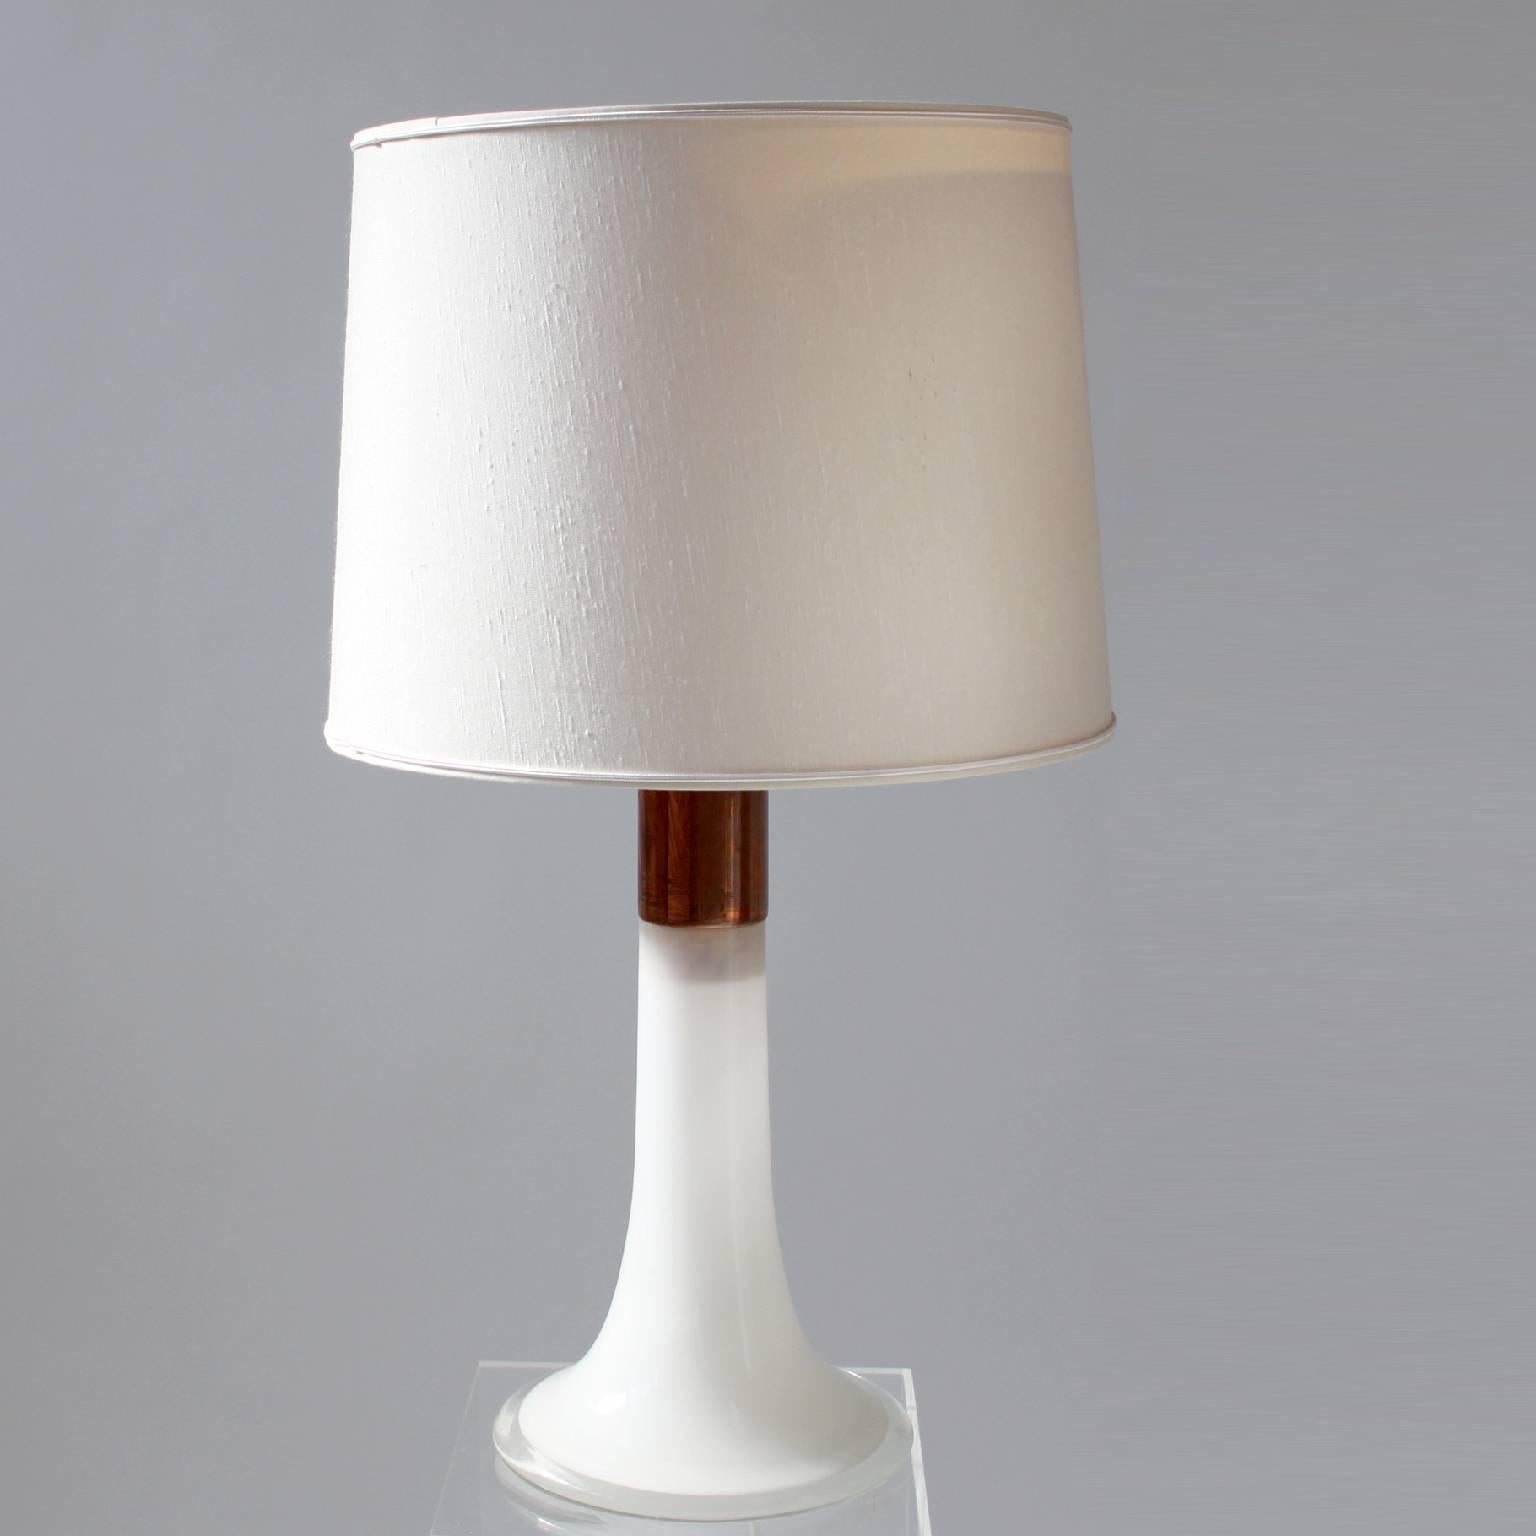 A sculptural and rare pair of Lisa Johansson-Pape table lamps model 46-017.

Very good original condition, including the inner shades which makes this lamp extraordinary. 

Opal glass, copper and fabric lampshade.

Ornö Edition 1961